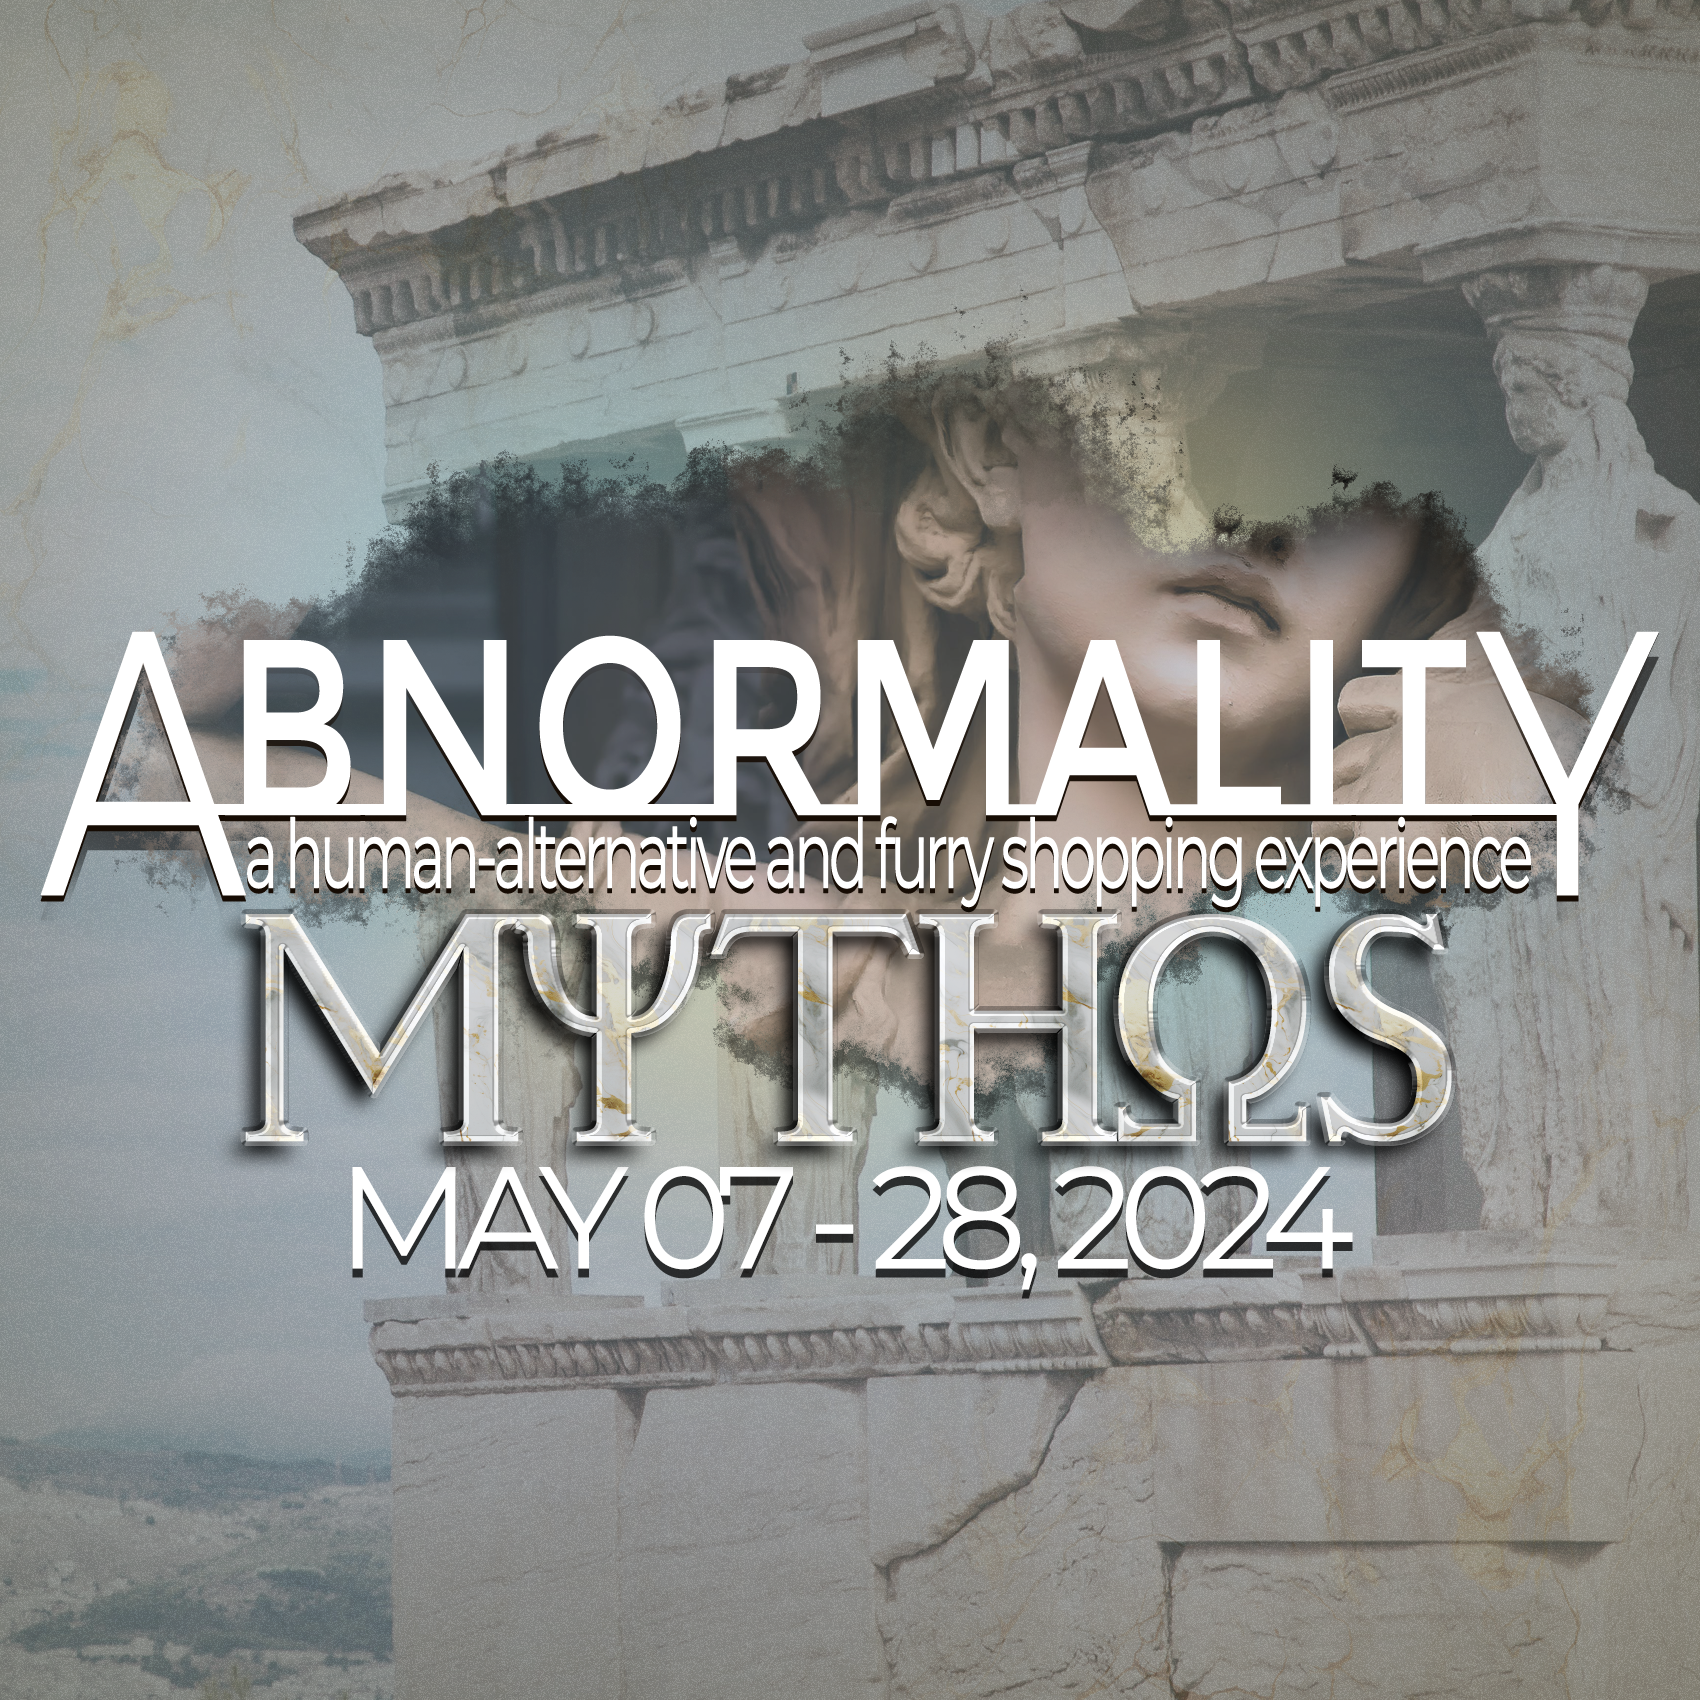 EMBARK ON AN EPIC ODYSSEA AT ABNORMALITY MYTHOS EVENT